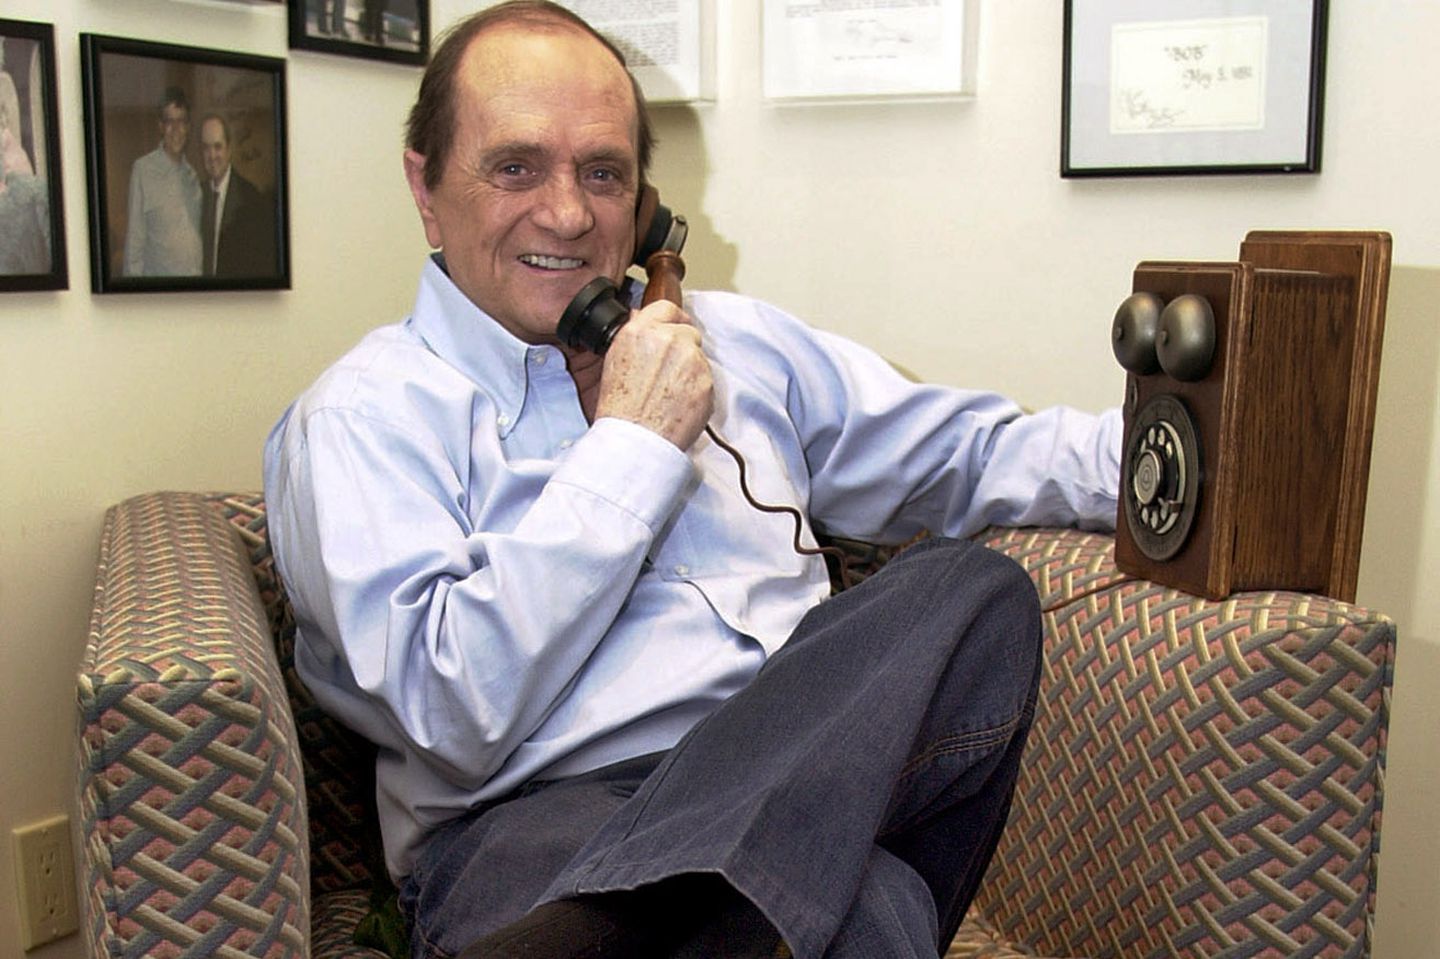 Comedian Bob Newhart at his home in Los Angeles in 2003. Newhart died in Los Angeles on Thursday, July 18. He was 94.